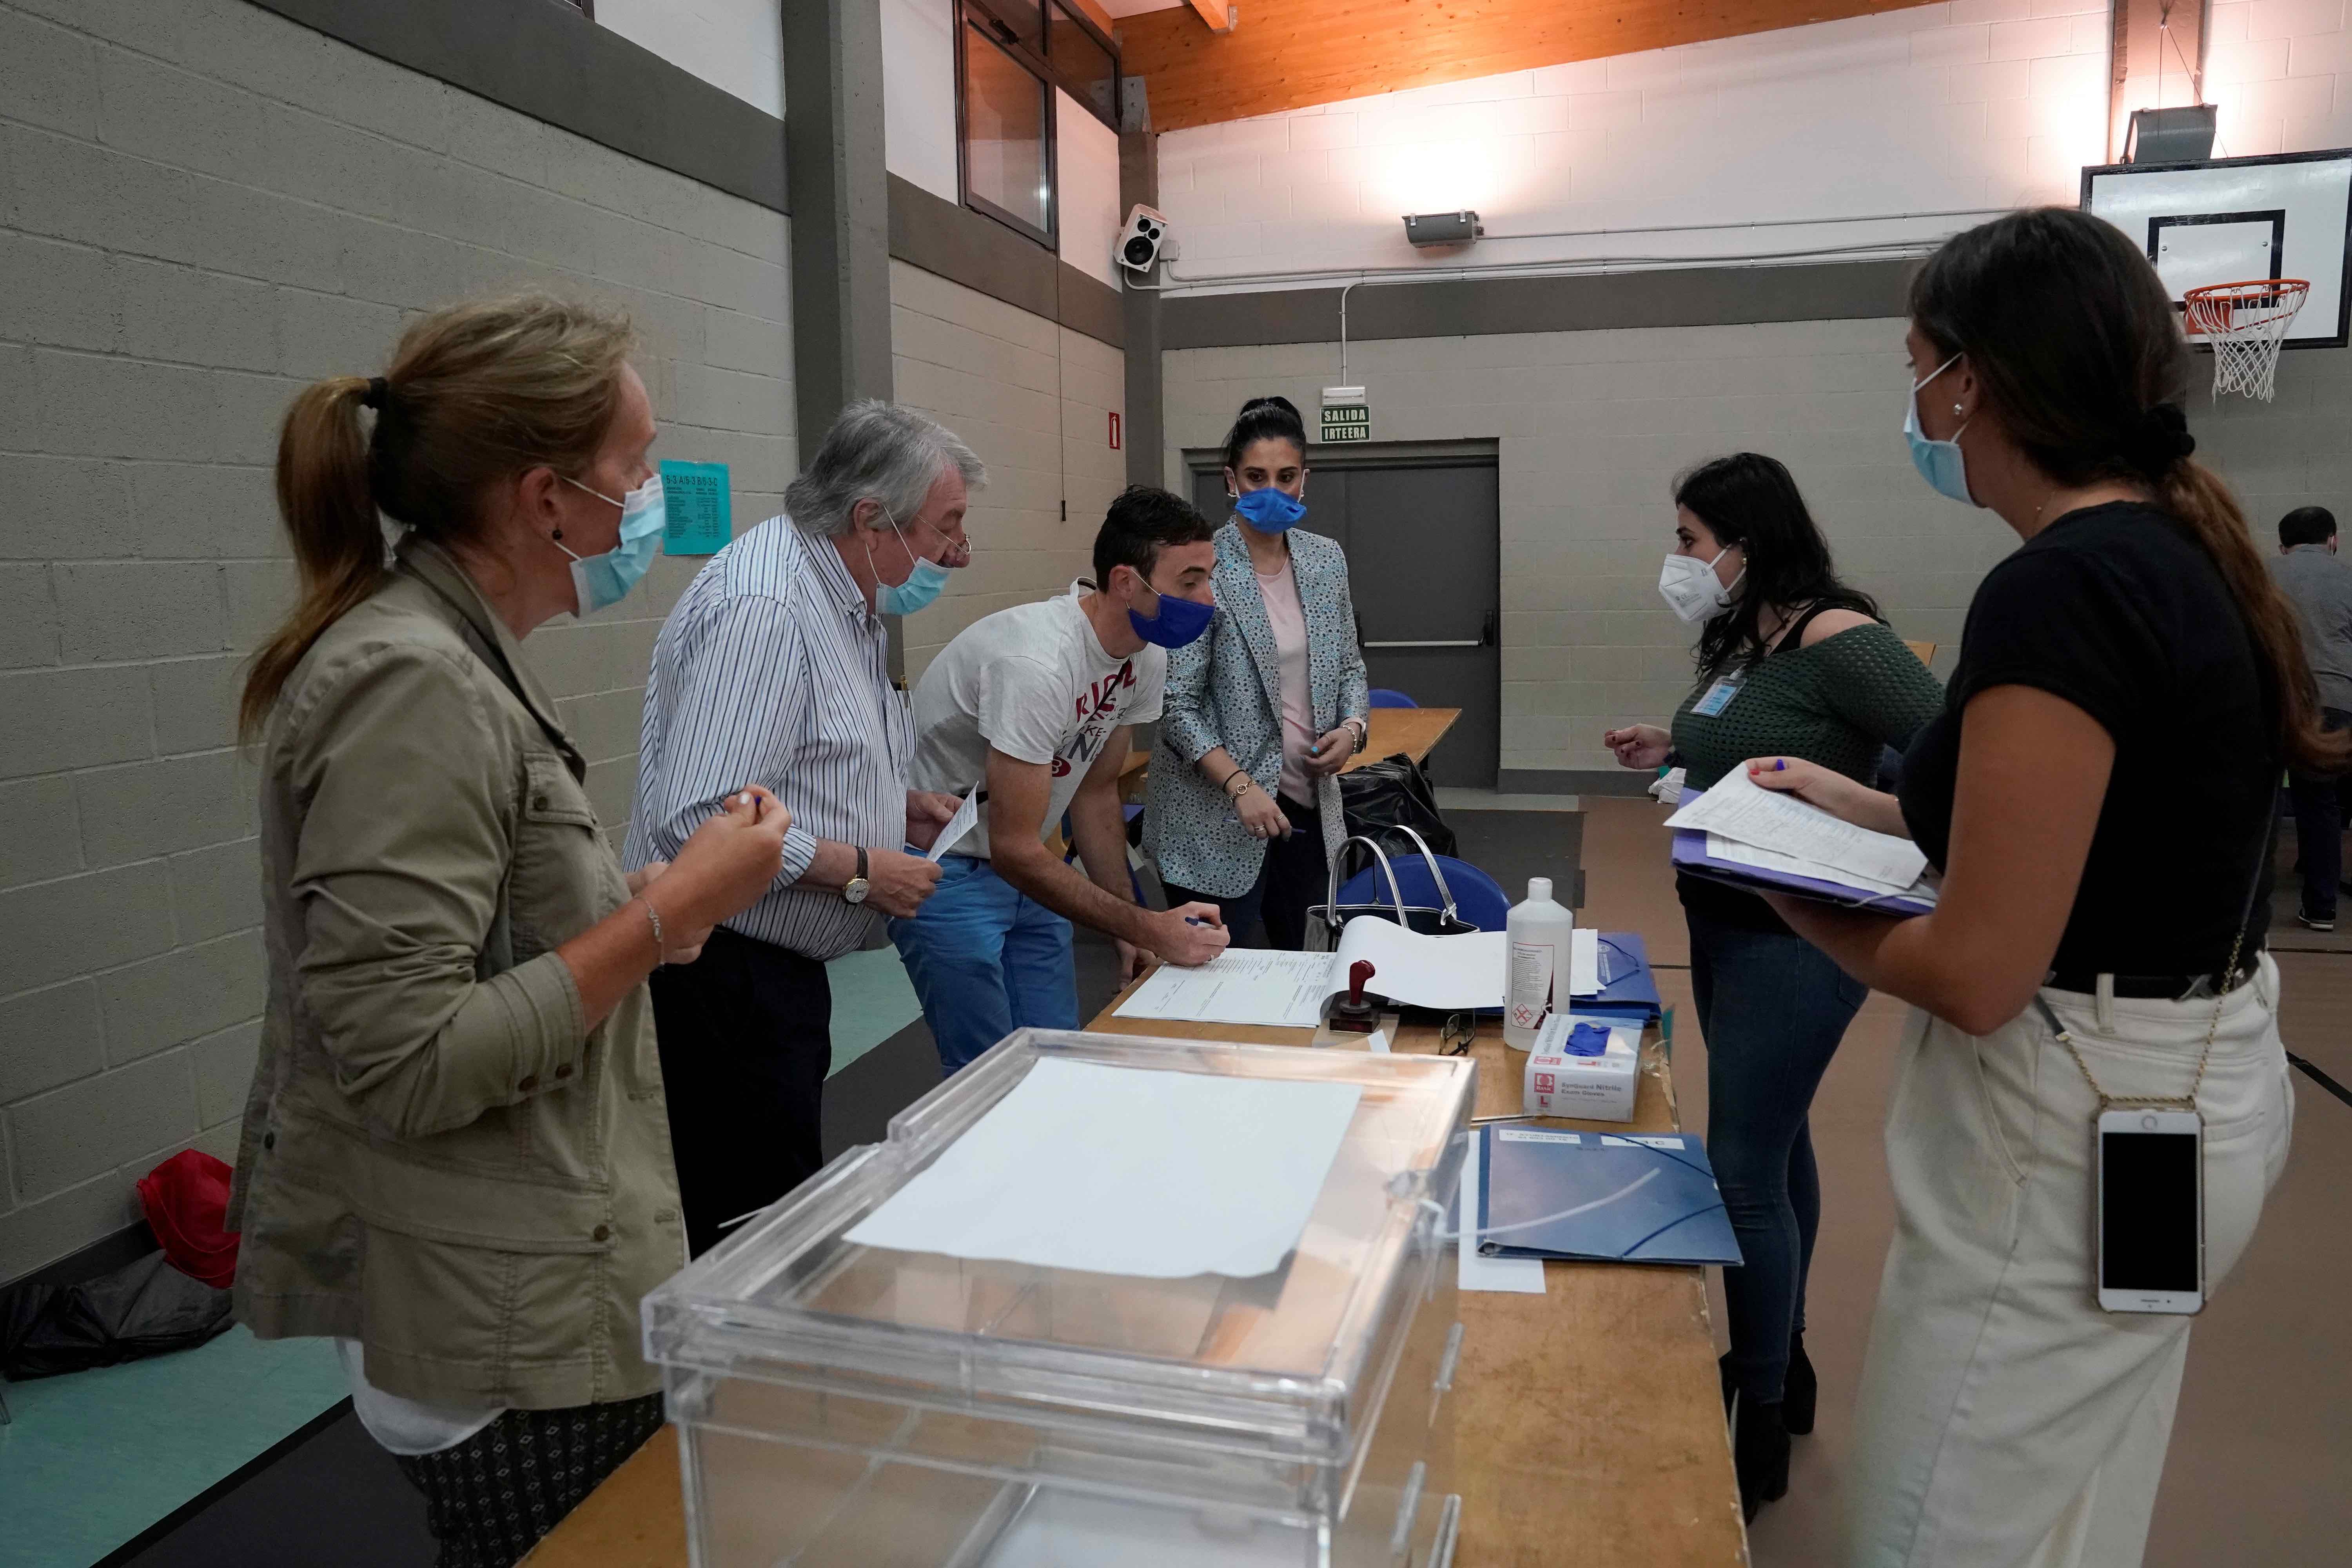 Workers organize papers at a polling station before the start of the voting during the Basque regional elections, amid the coronavirus disease (COVID-19) outbreak, in Durango, July 12, 2020 (by REUTERS/Vincent West)